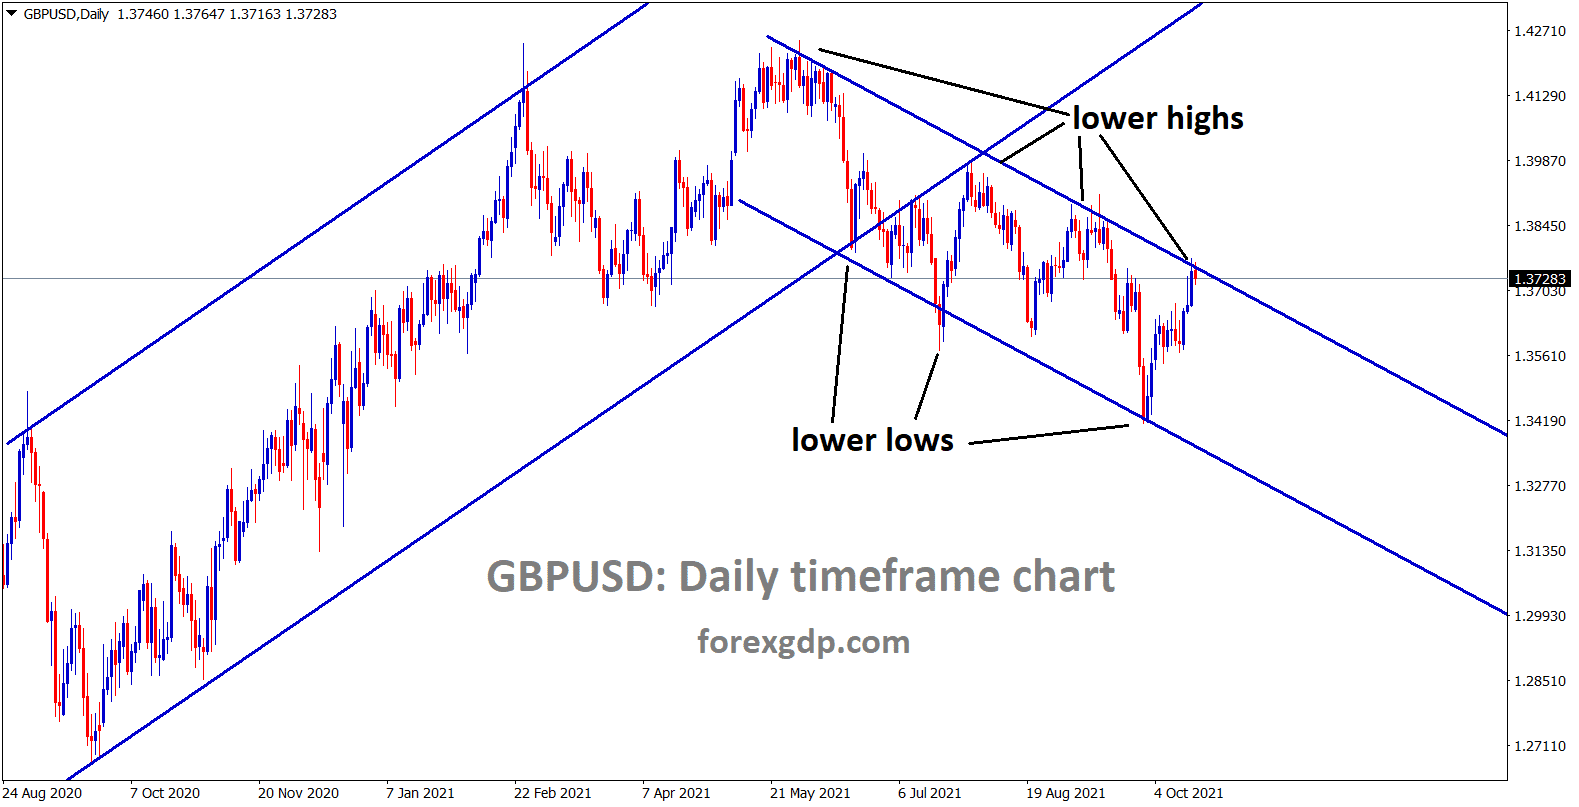 GBPUSD standing at the lower high of the descending channel now wait for breakout or reversal